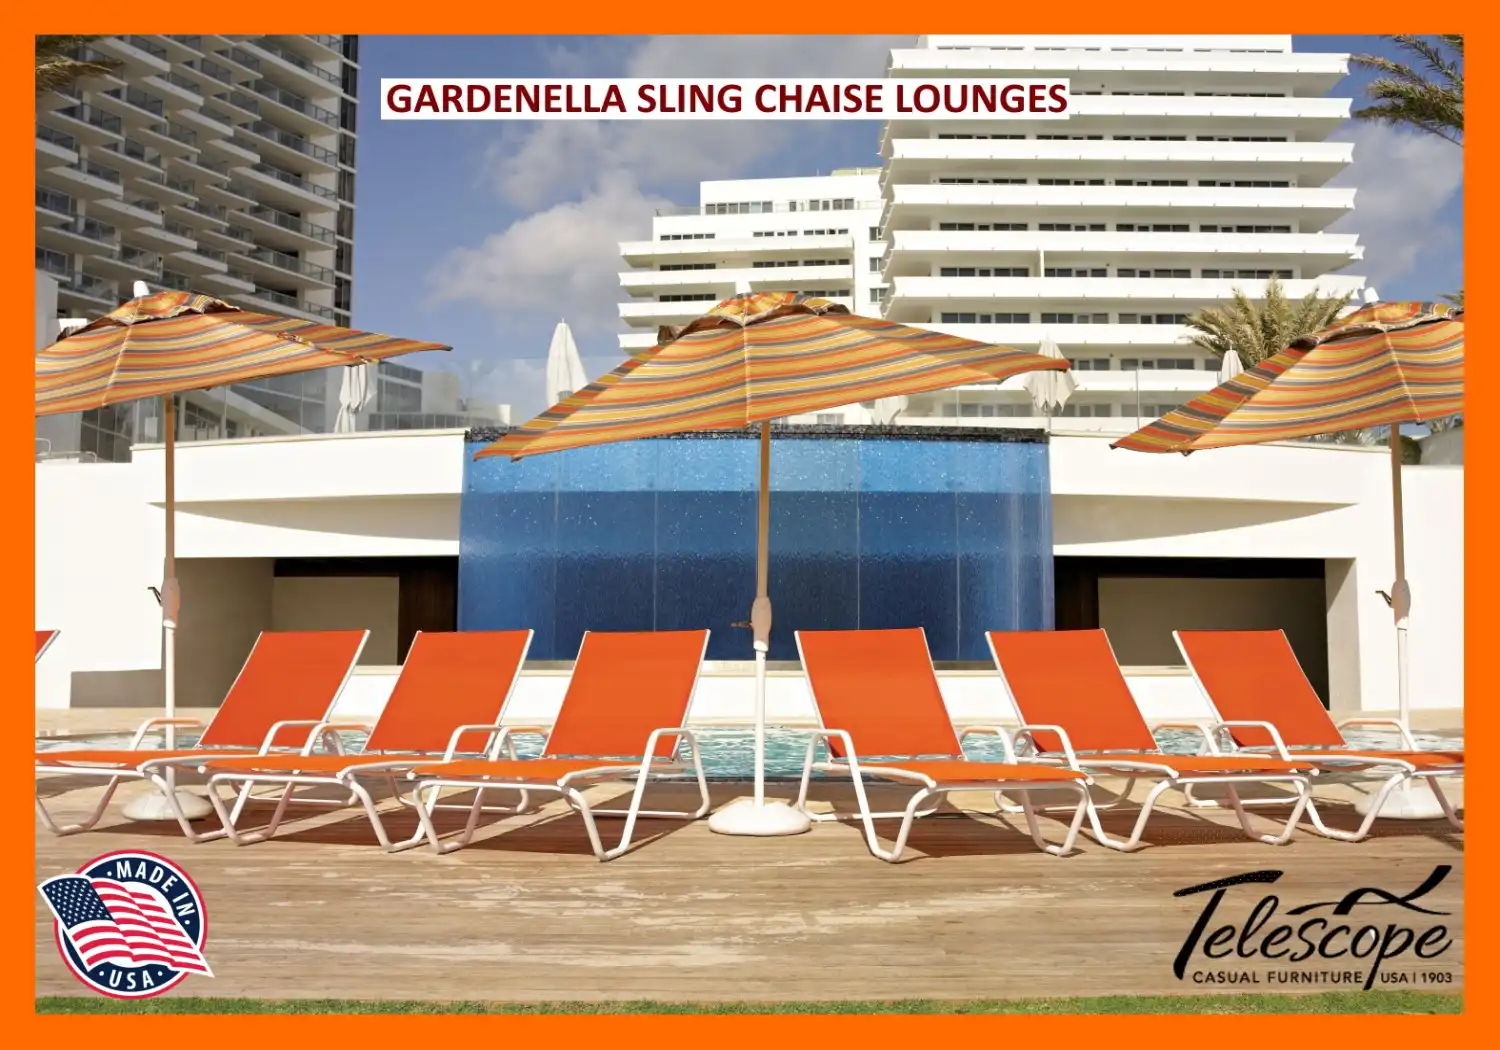 GARDENELLA SLING CHAISE LOUNGERS